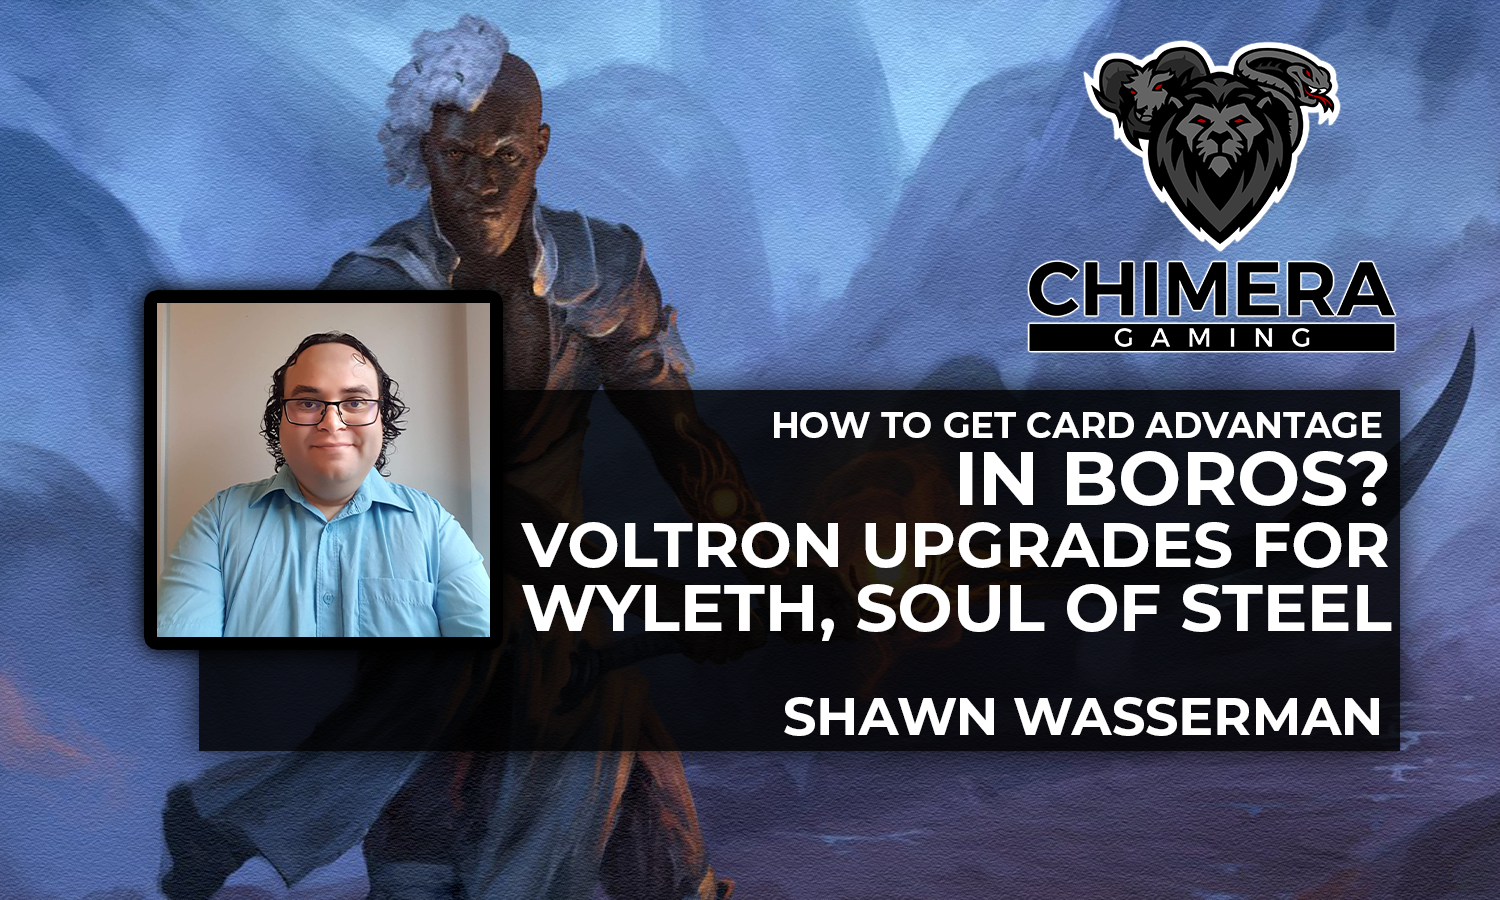 How to Get Card Advantage in Boros? Voltron Upgrades for Wyleth, Soul of Steel By Shawn Wasserman